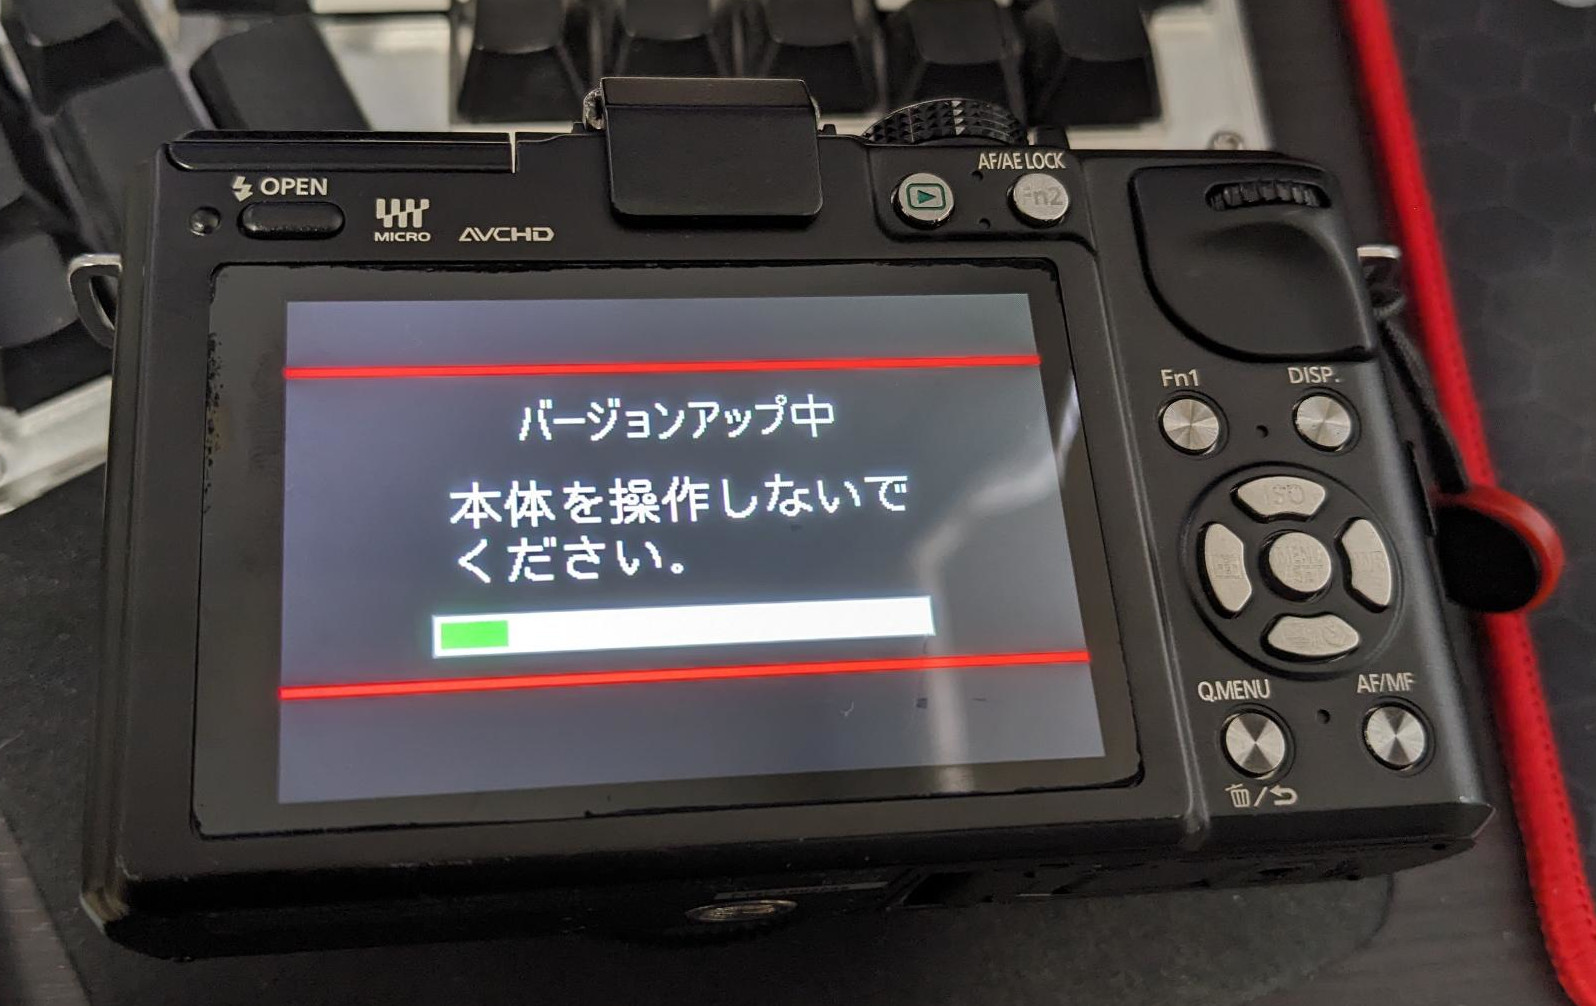 The Panasonic GX1 actively upgrading firmware